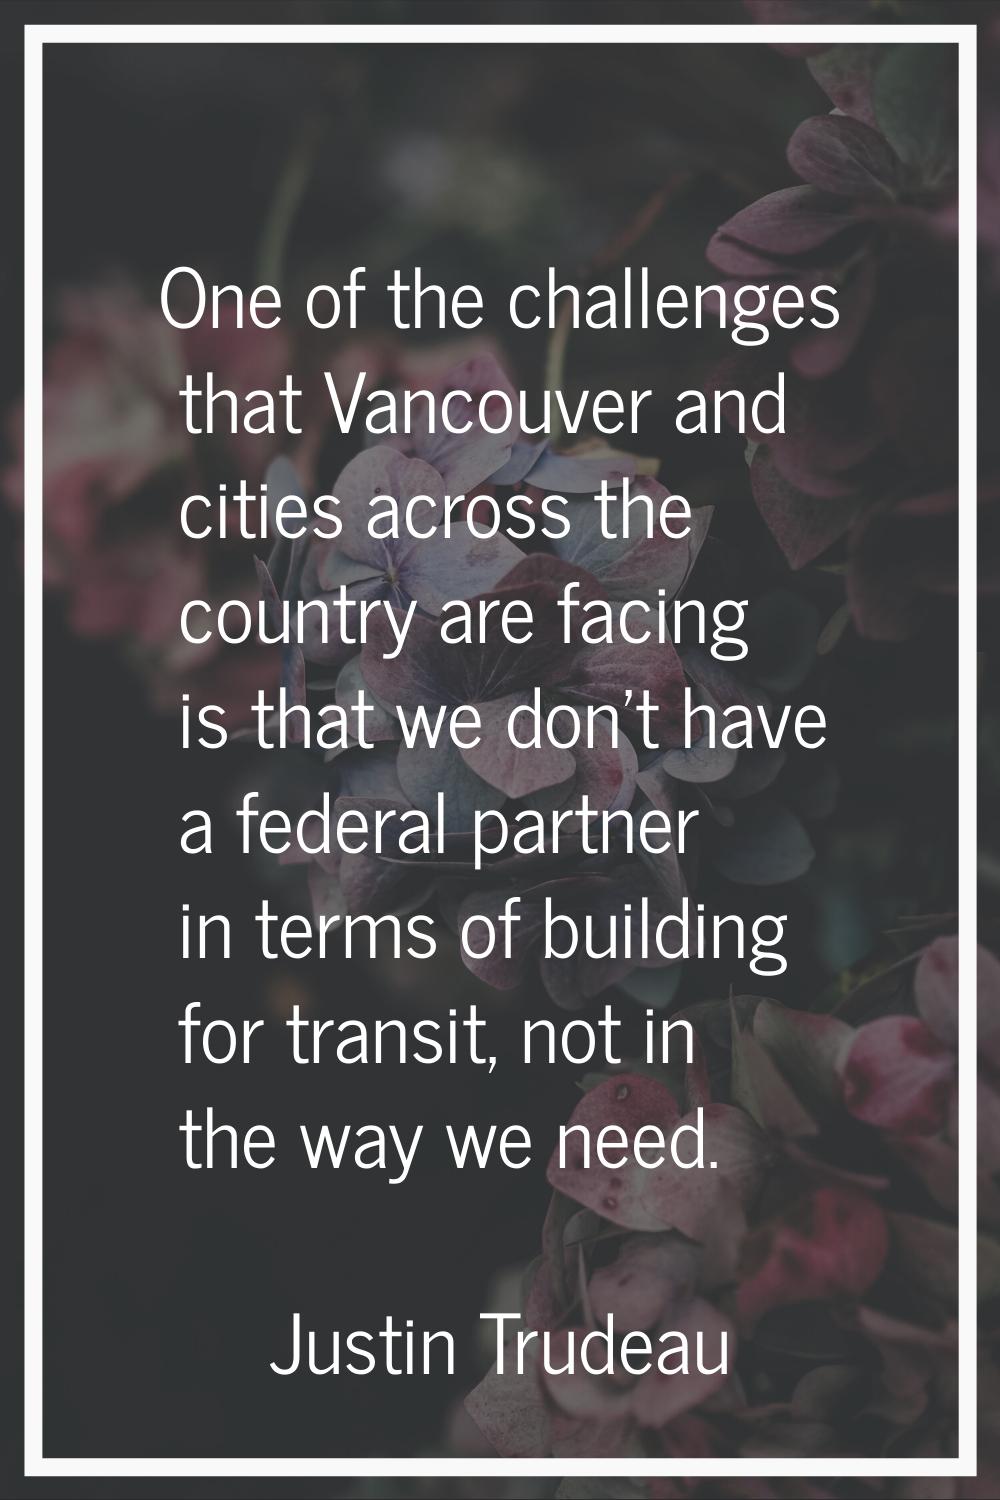 One of the challenges that Vancouver and cities across the country are facing is that we don't have